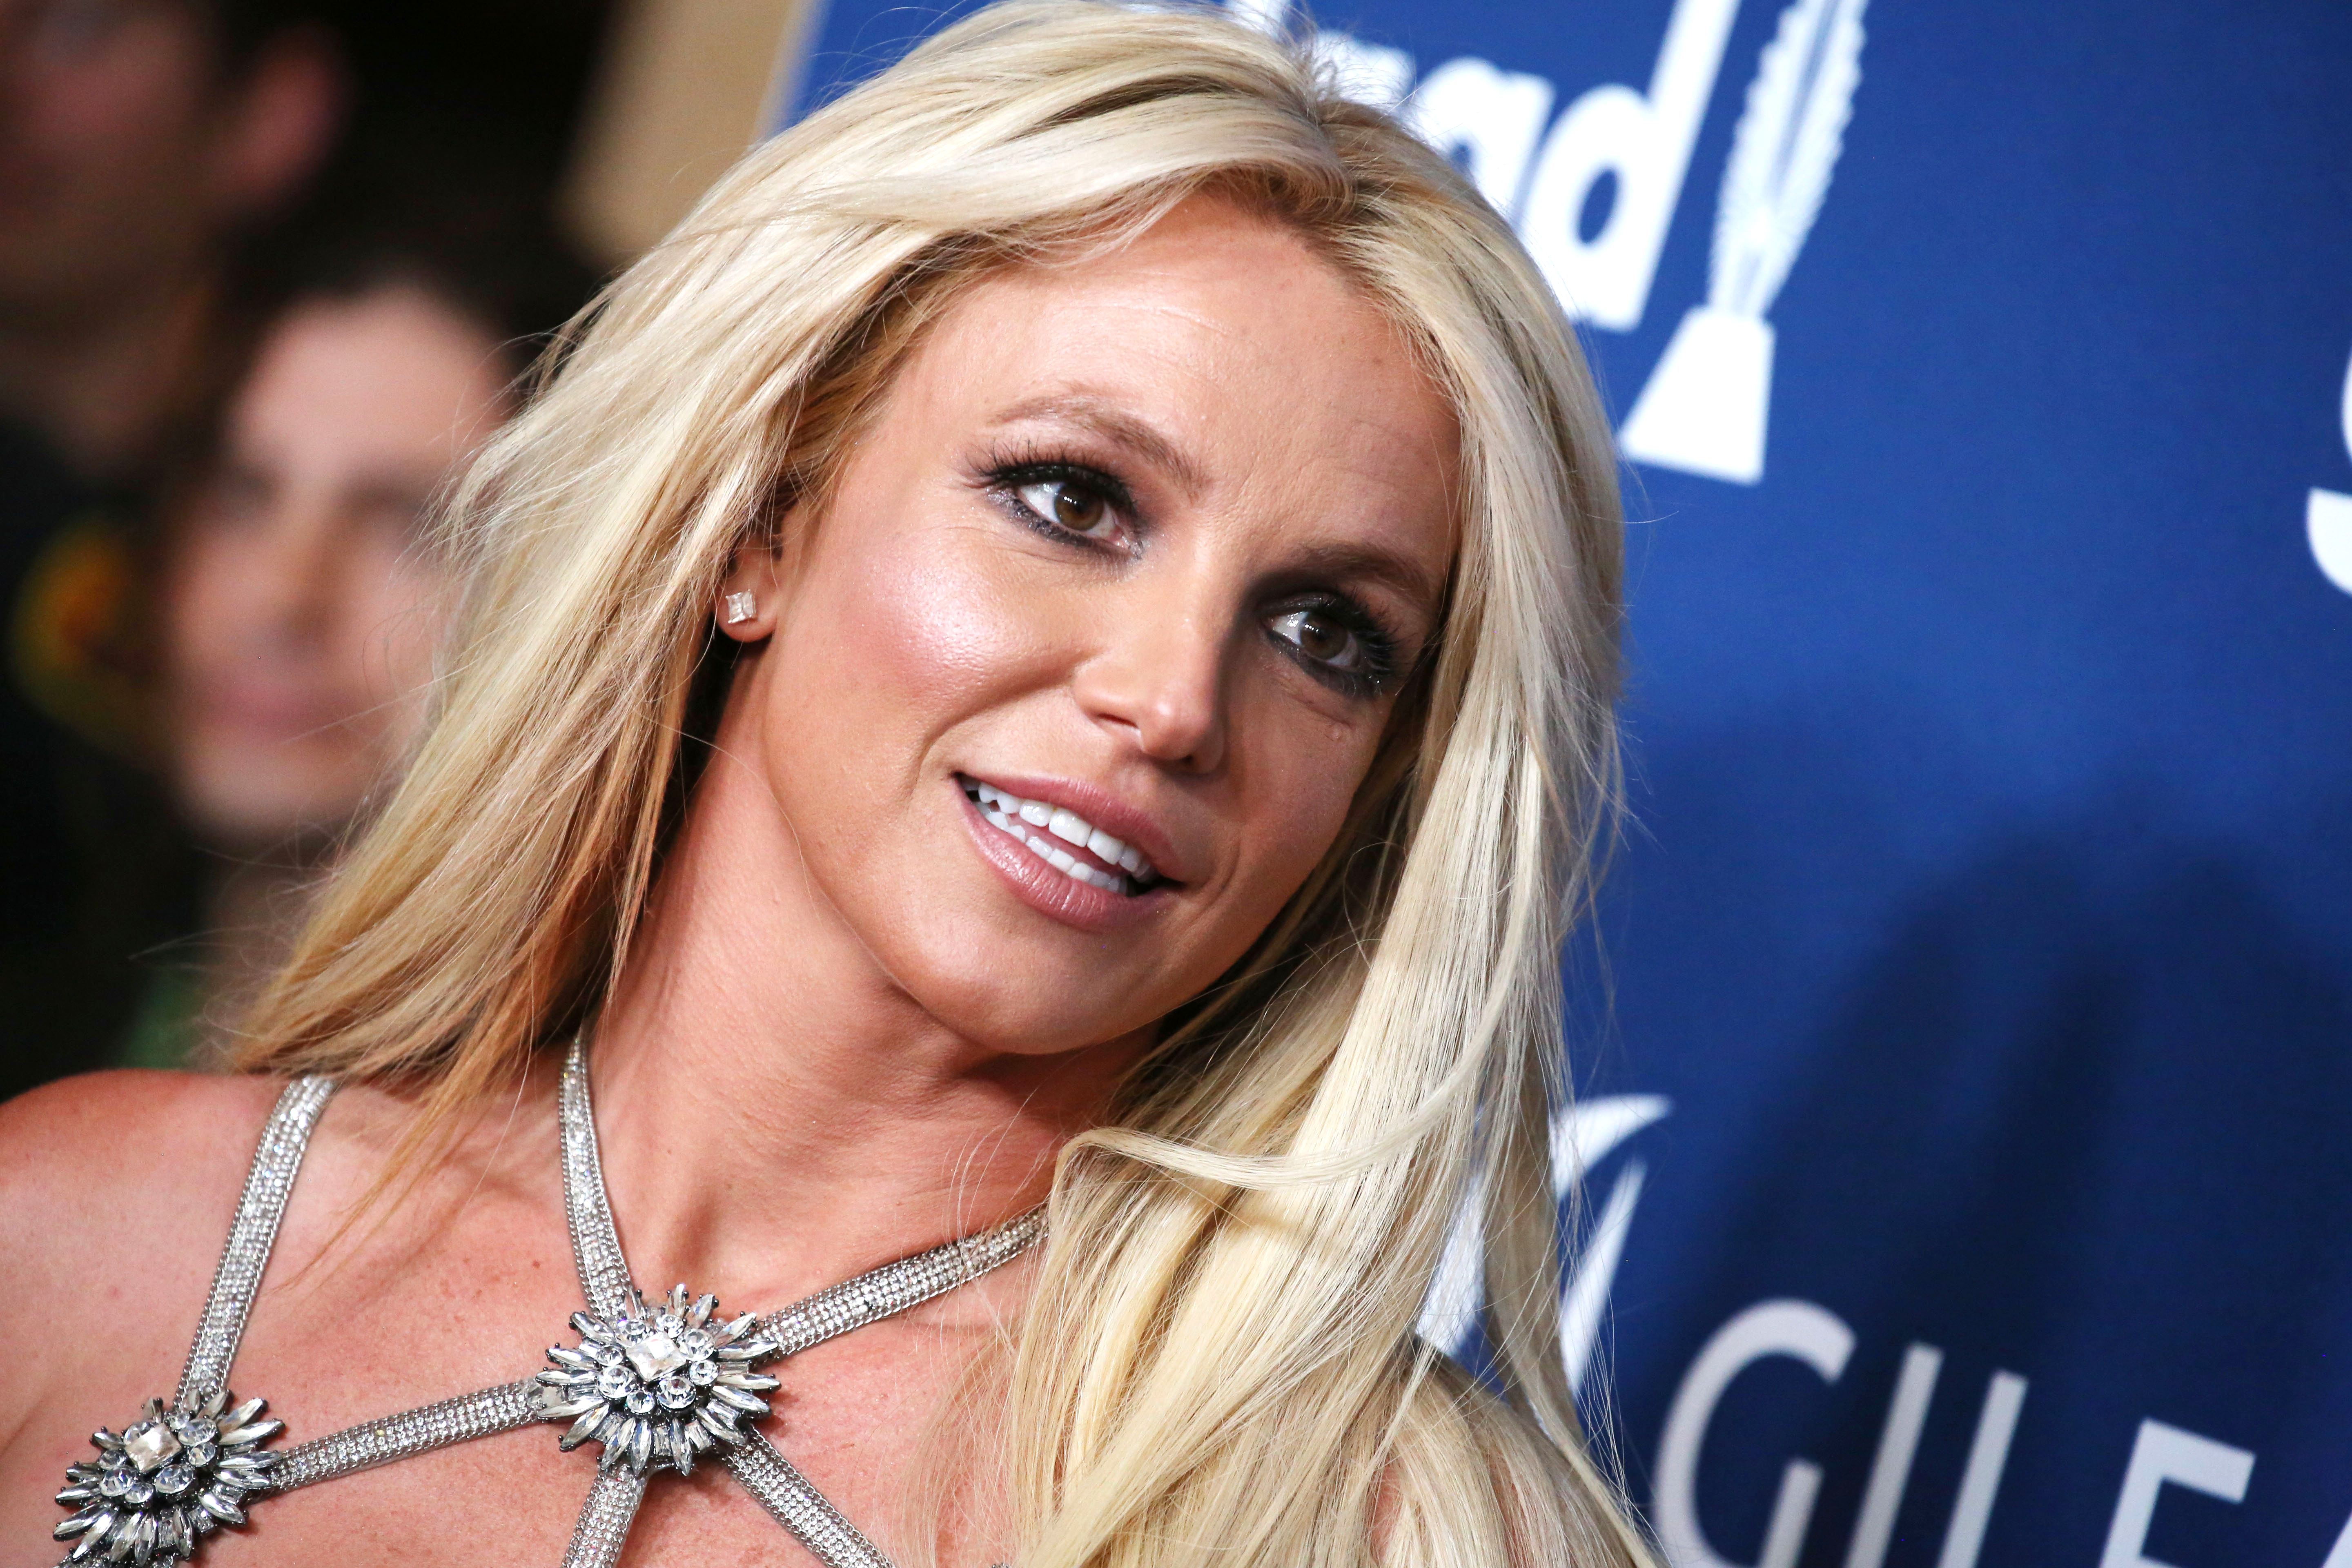 Britney Spears details why she posts topless, risqué pics on Instagram Wonderwall